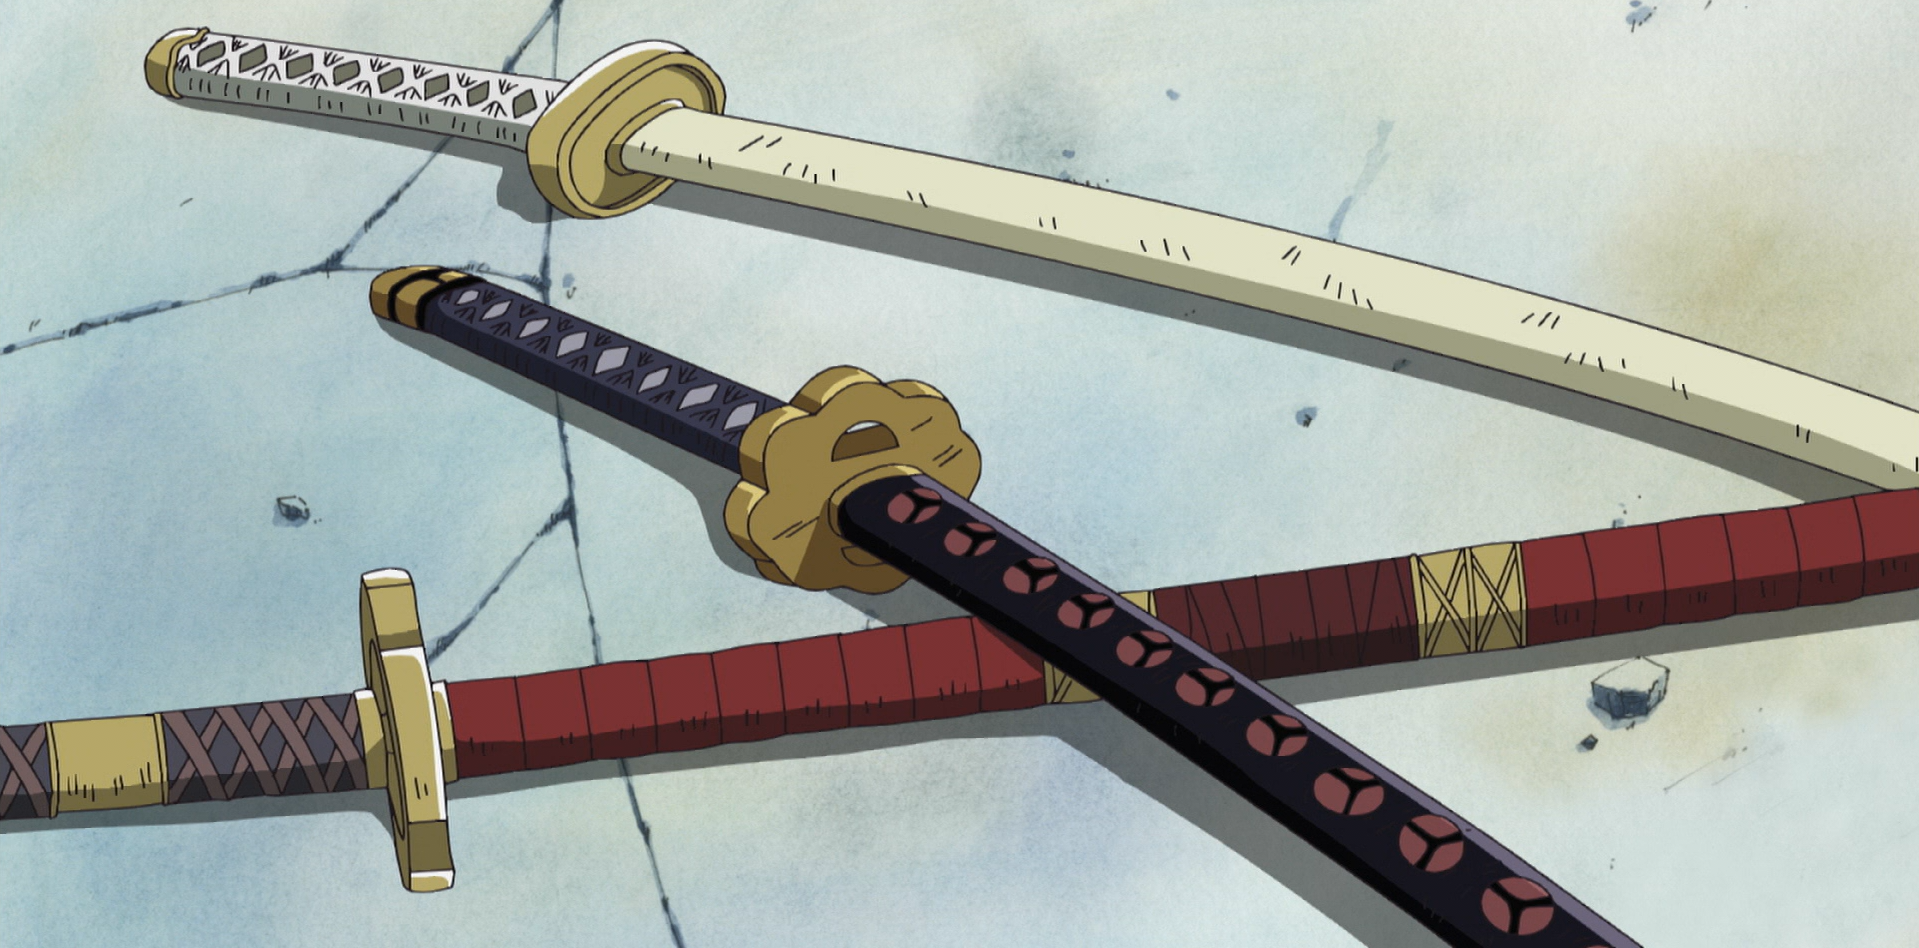 If Mihawk owns 1 of 12 legendary swords, where are the 11 other